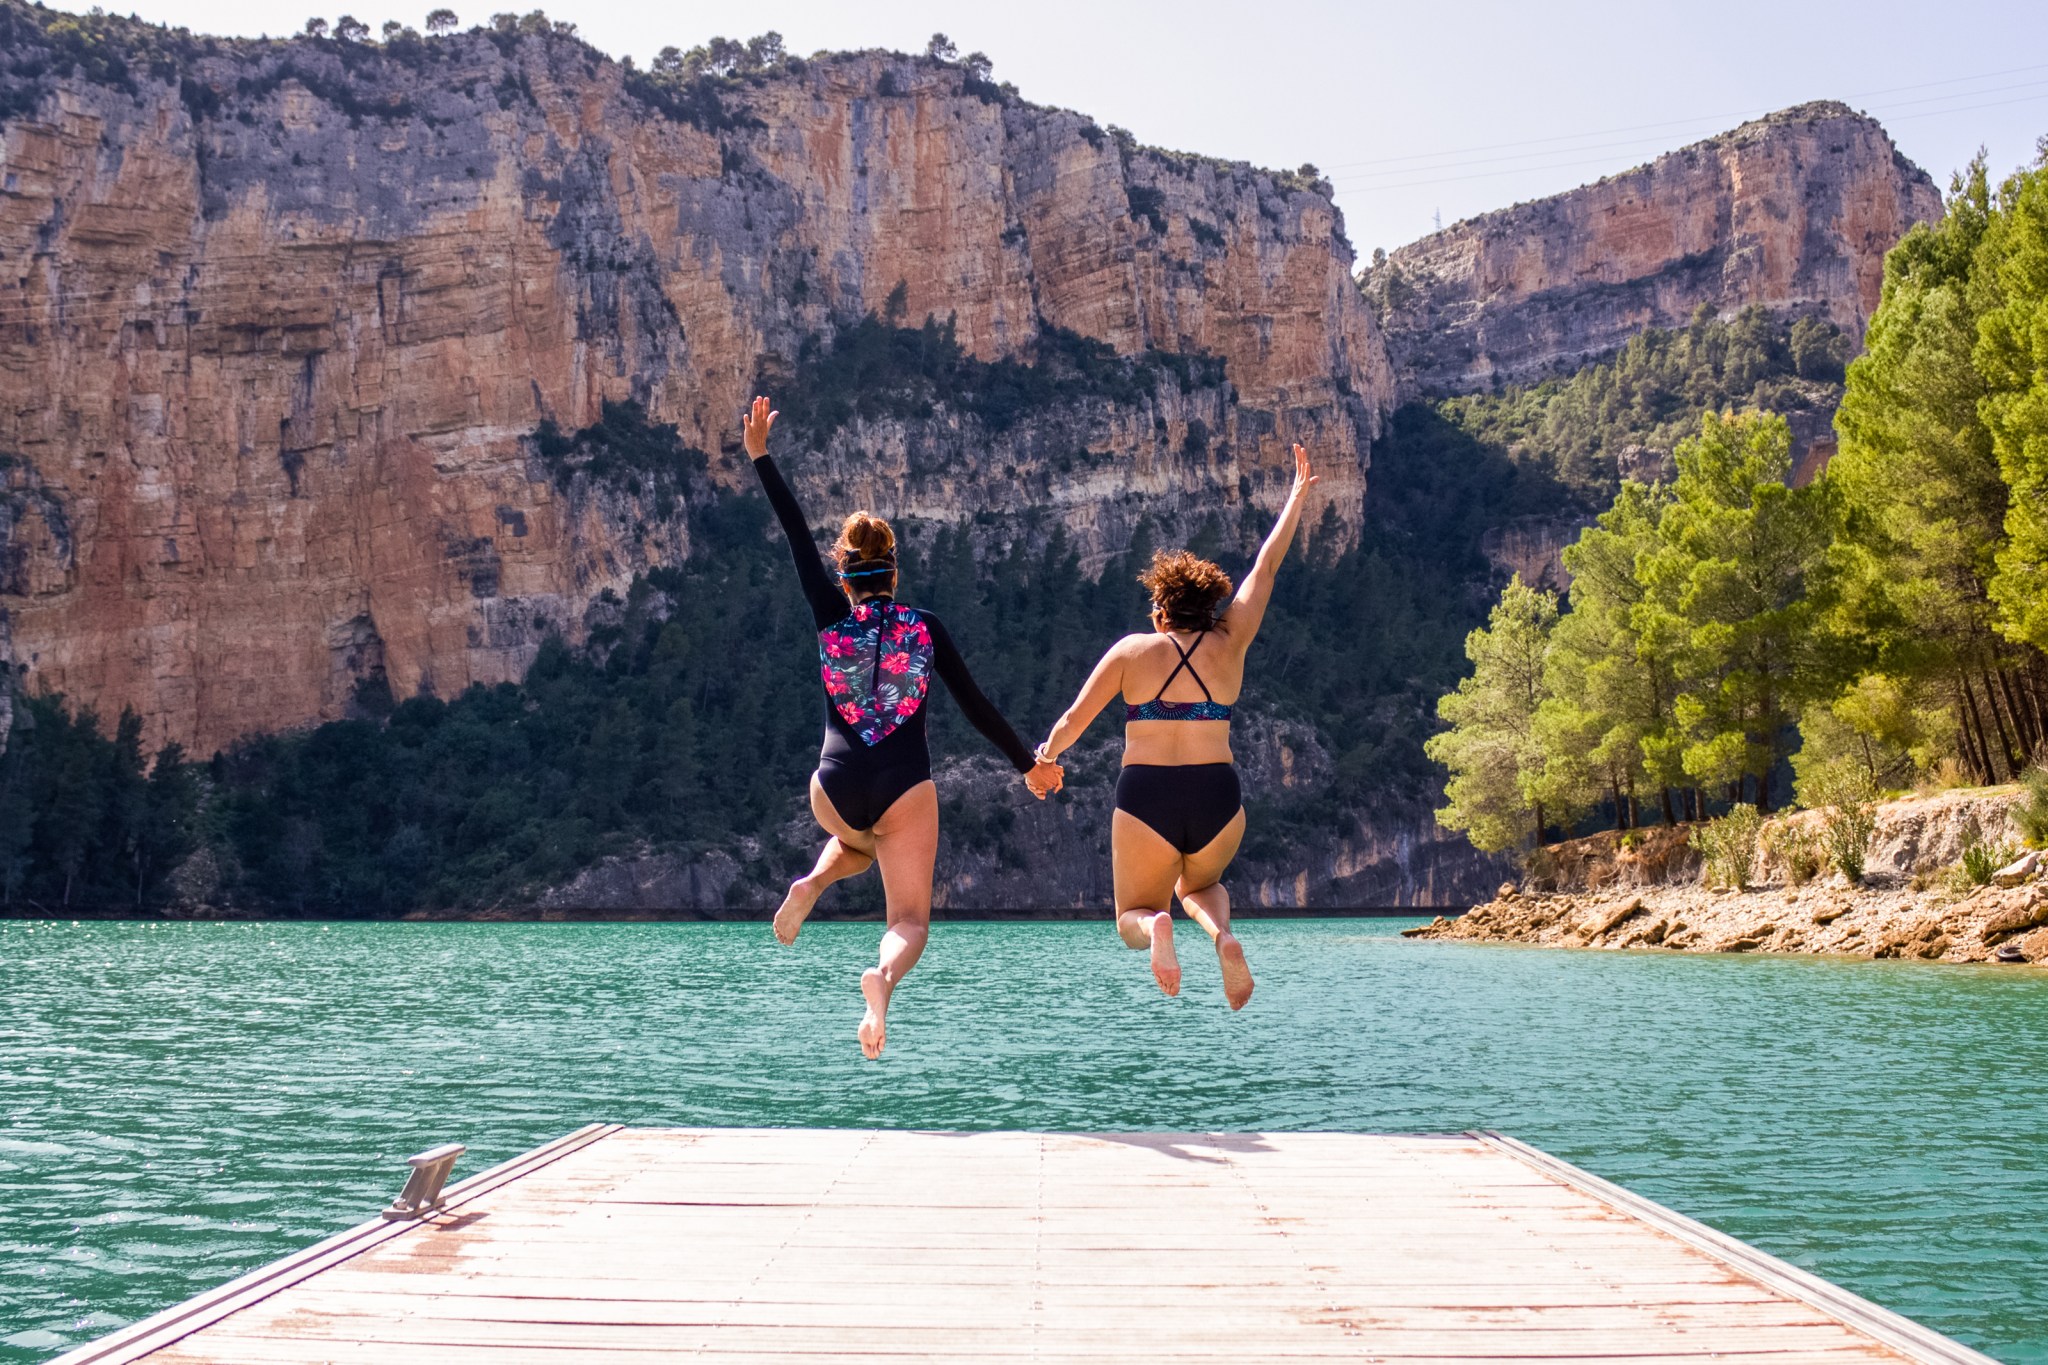 rear view of two women in bathing suits holding hands while jumping into the water from a jetty